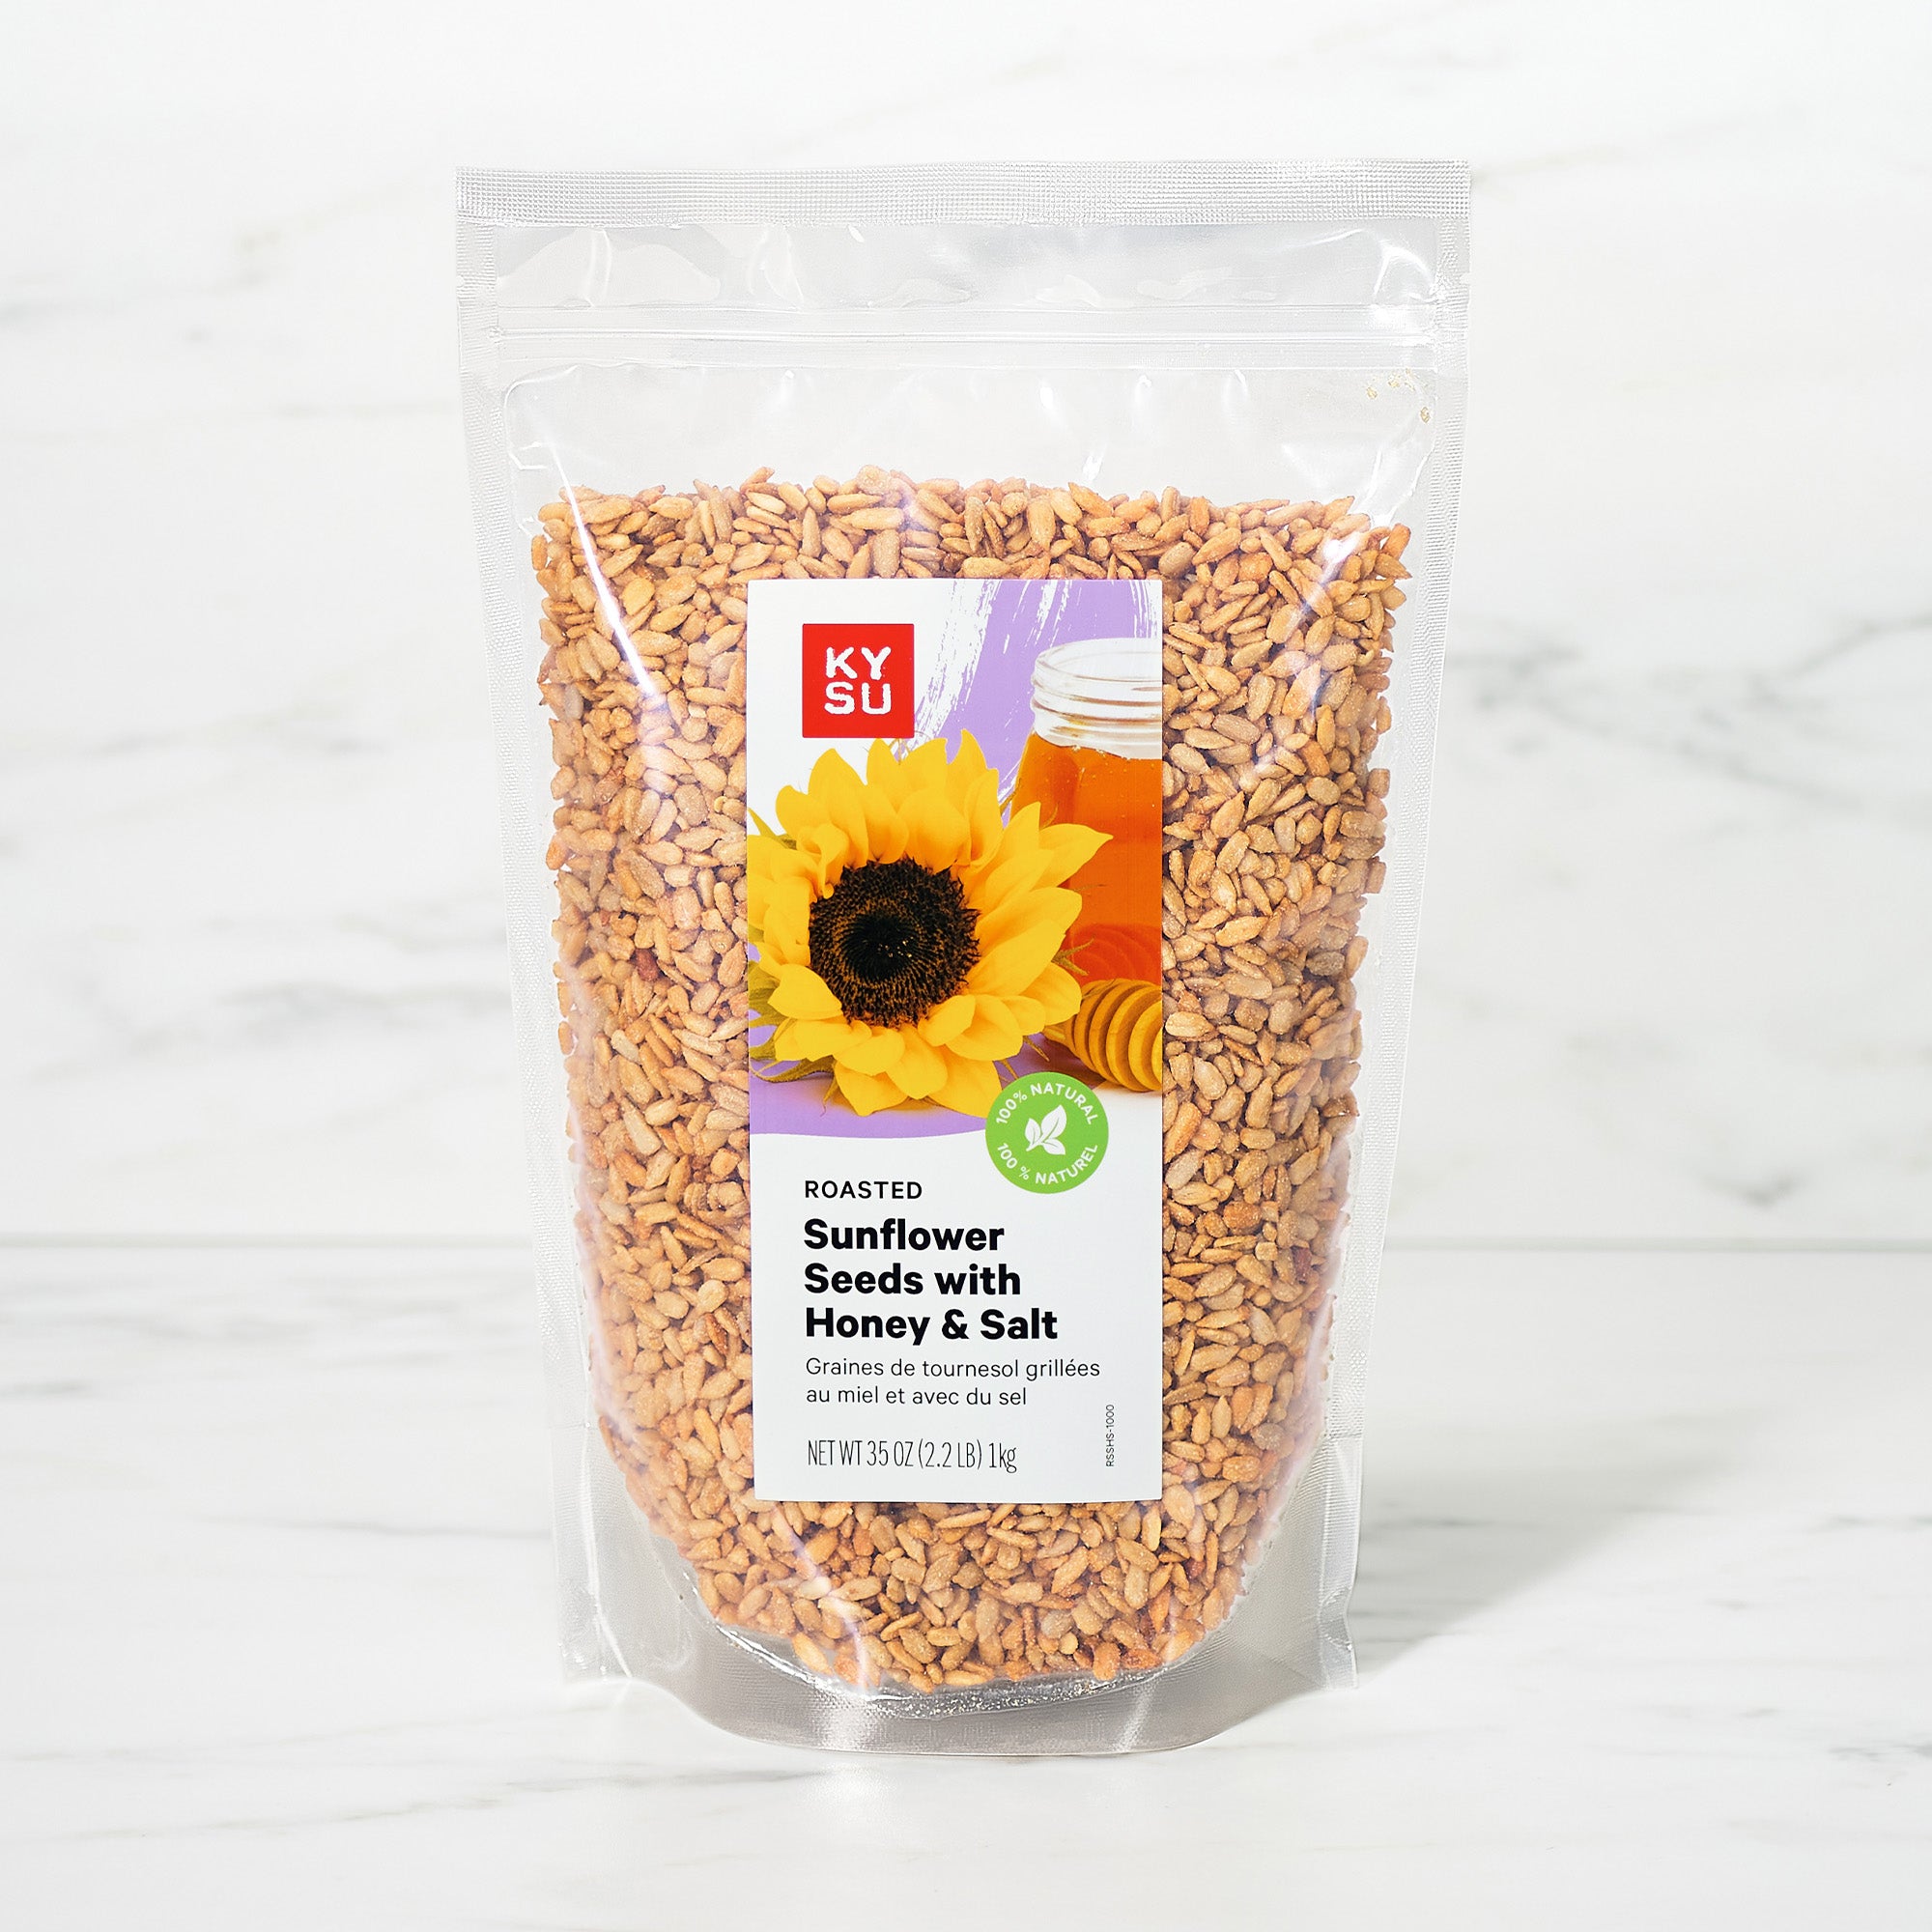 Roasted sunflower seeds with honey and salt, 2.2 lb